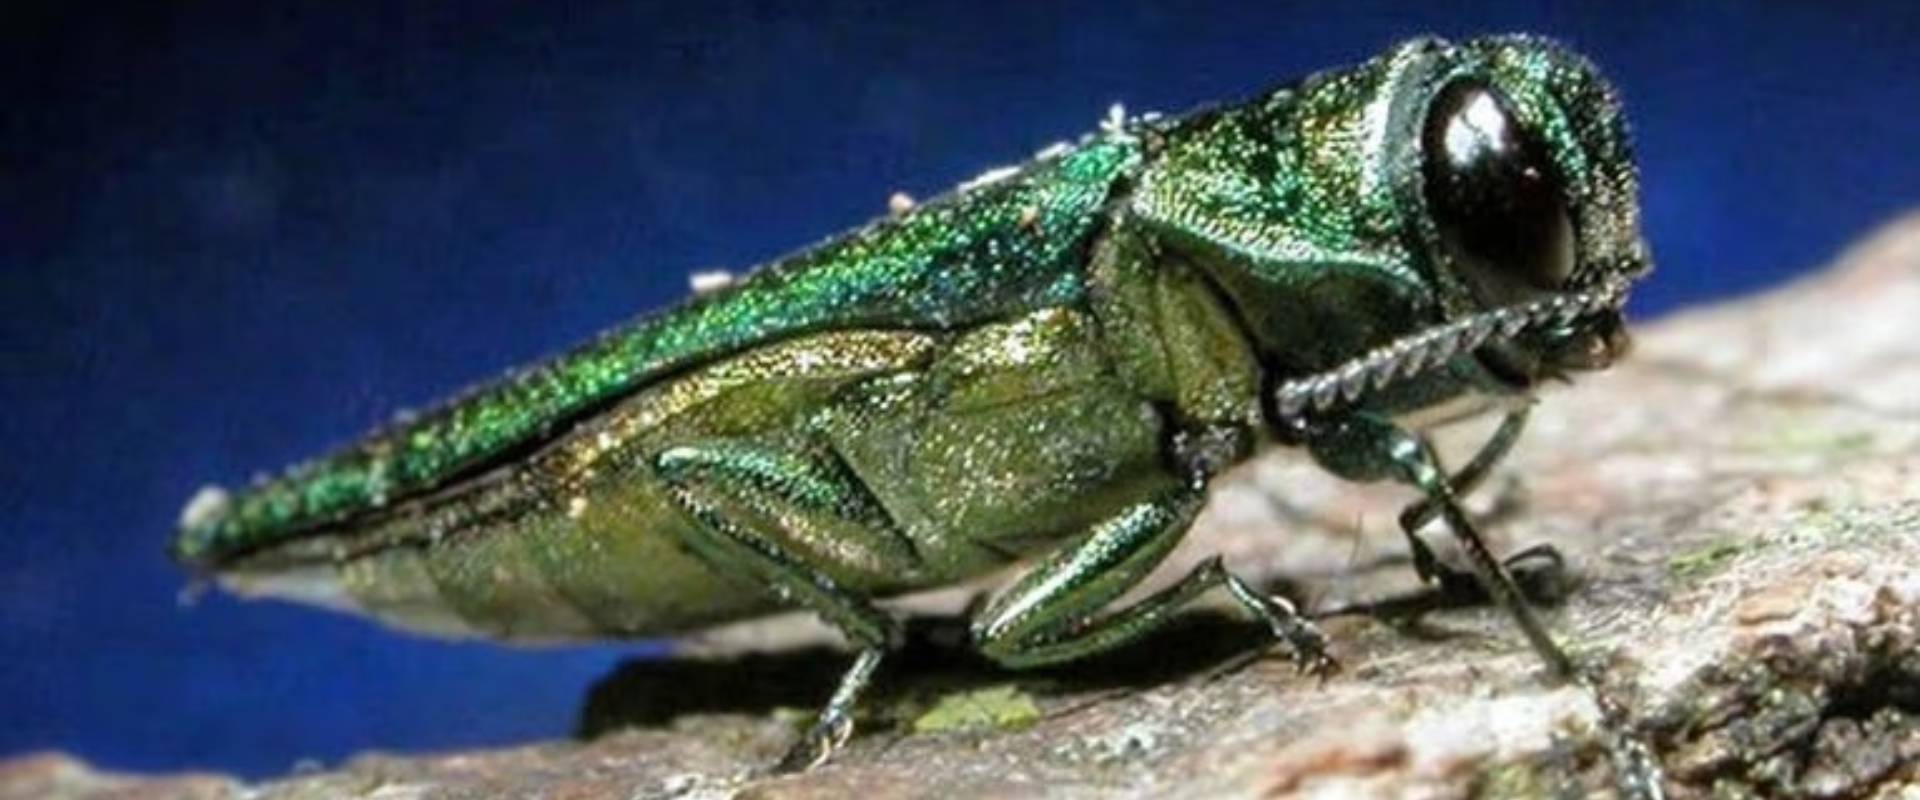 A metallic-green emerald ash borer with large black eyes sits on a leaf.